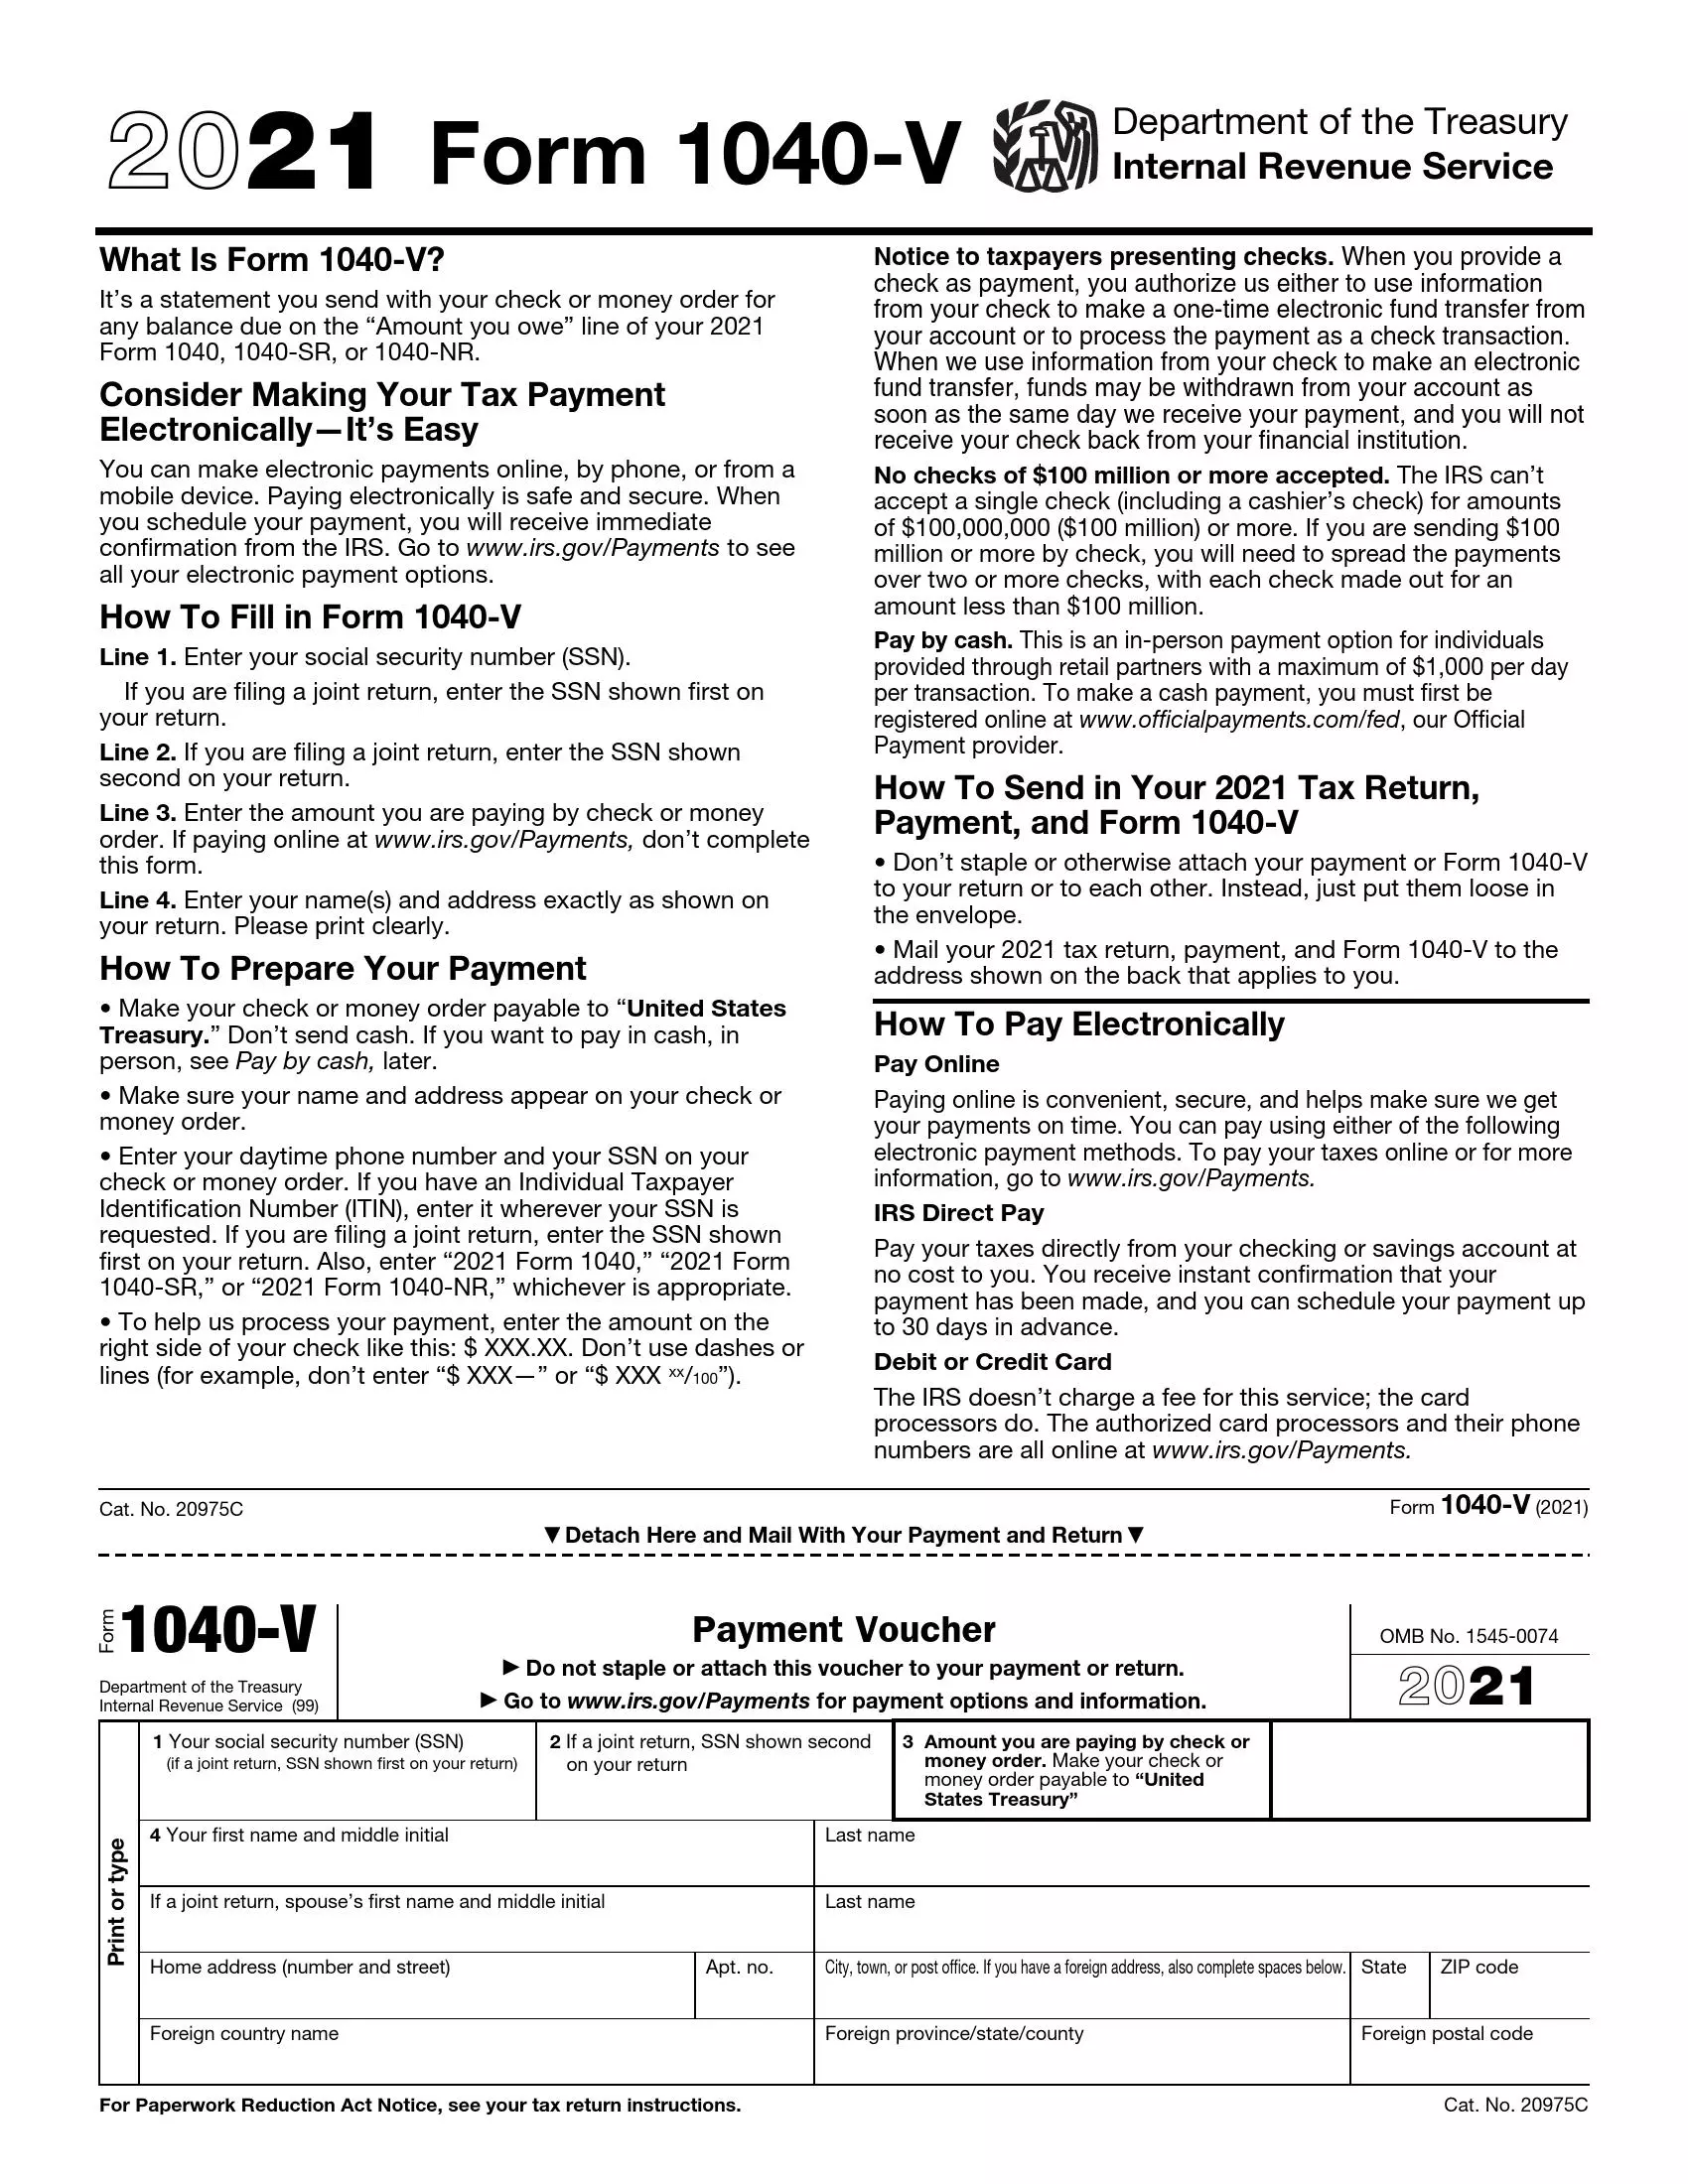 irs form 1040-v 2021 preview